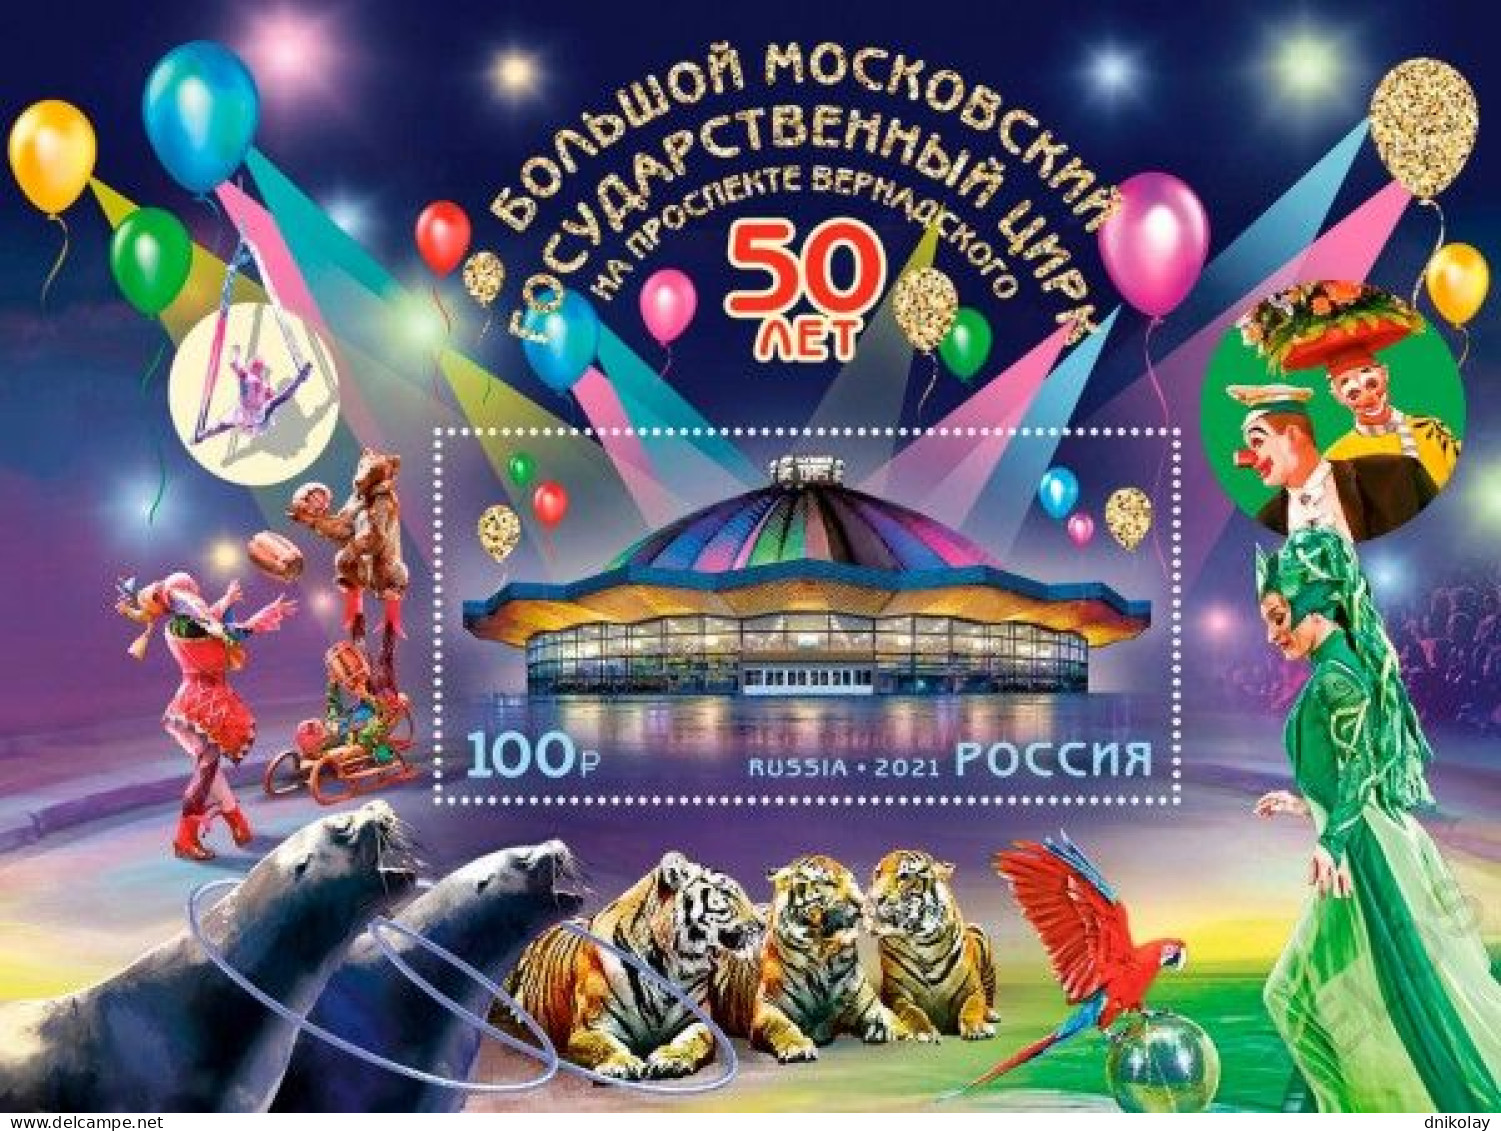 2021 3008 Russia Booklet The 50th Anniversary Of The Great Moscow State Circus On Vernadsky Avenue MNH - Unused Stamps